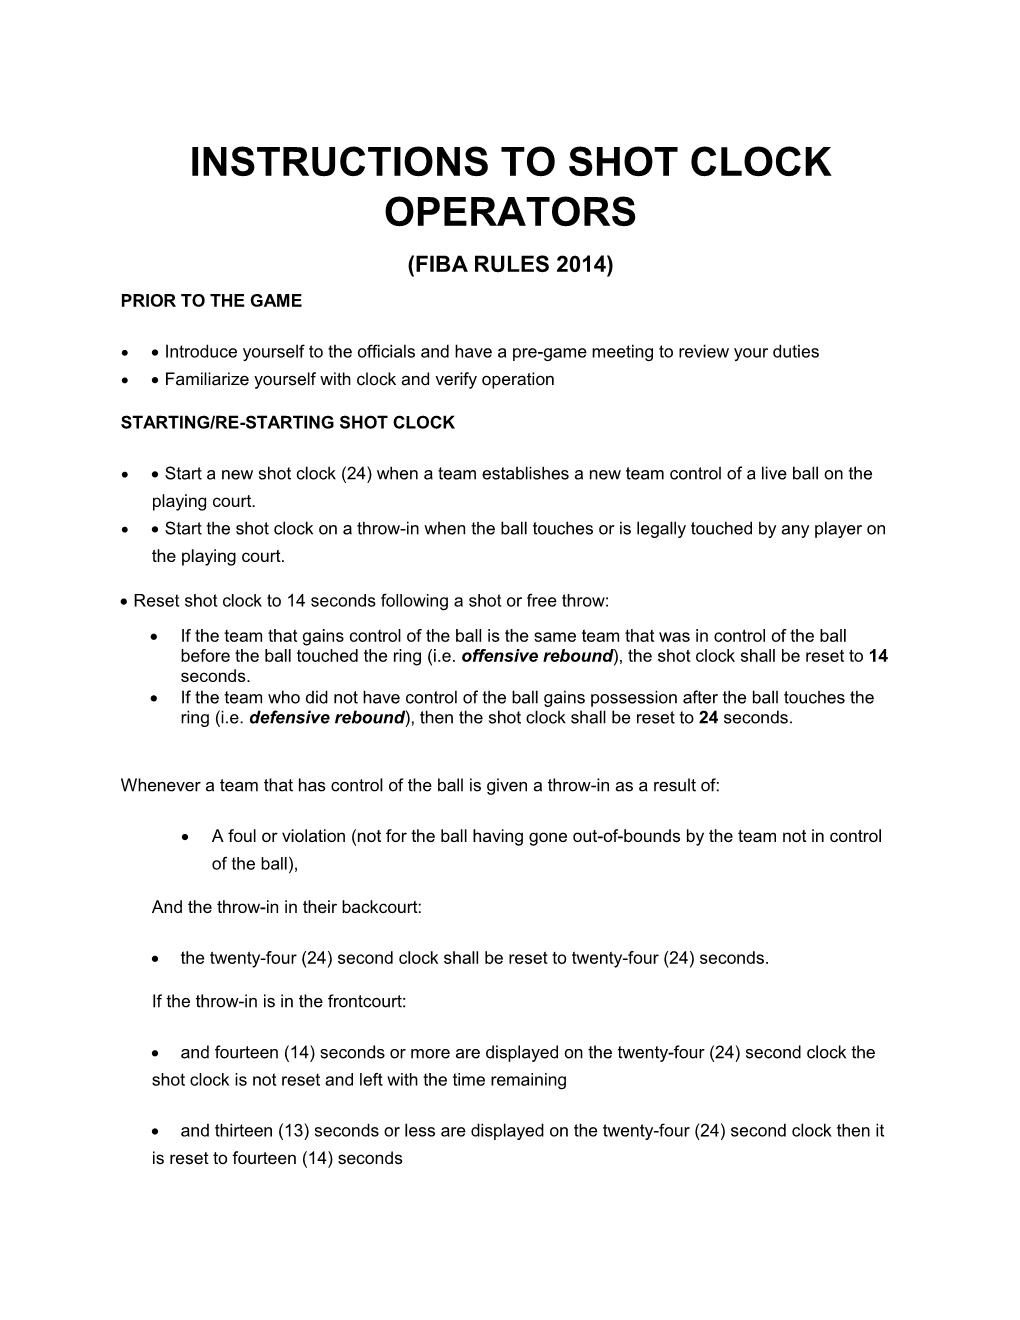 Instructions to Shot Clock Operators (Fiba Rules 2014) Prior to the Game